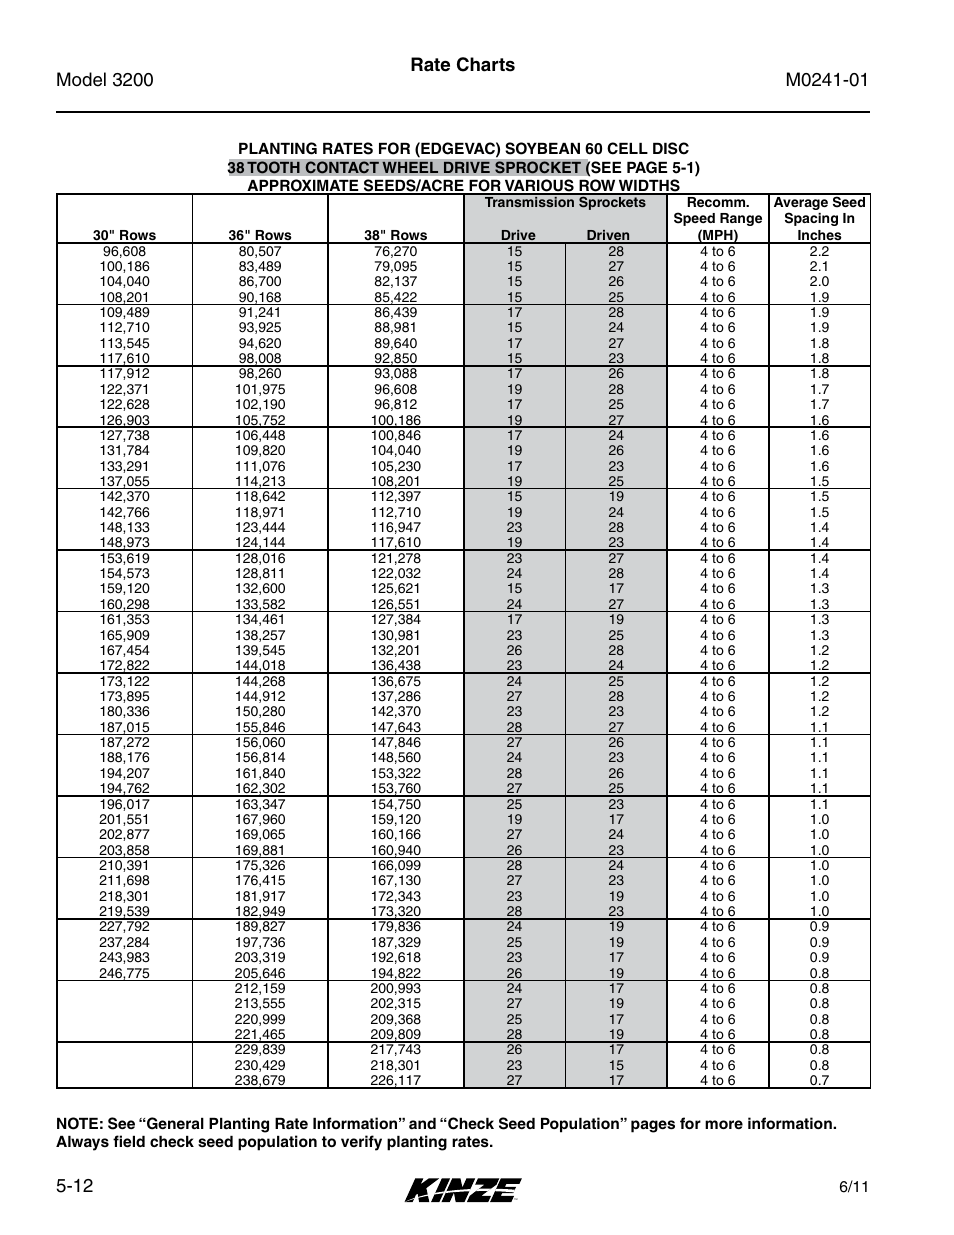 Rate charts | Kinze 3200 Wing-Fold Planter Rev. 7/14 User Manual | Page 78 / 192